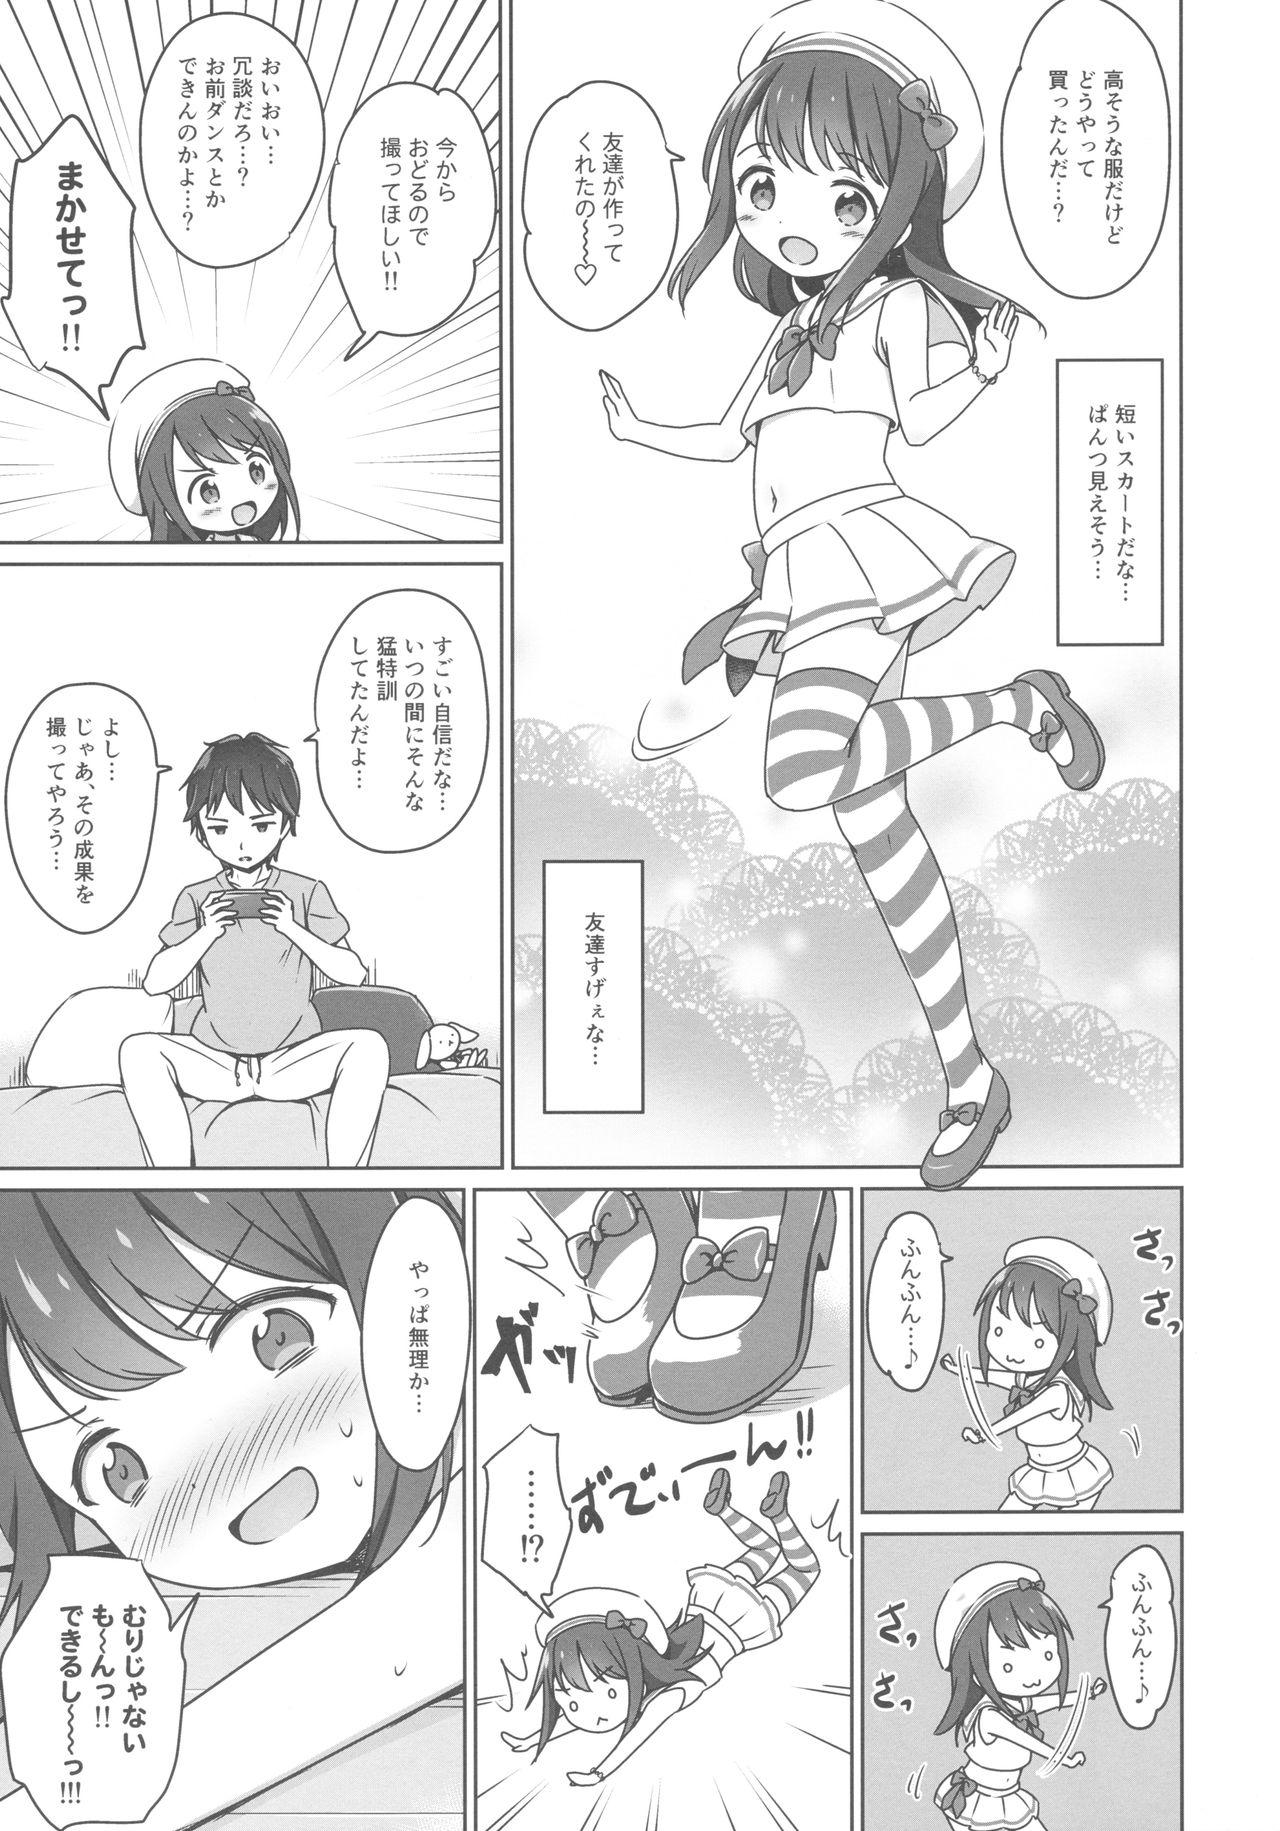 Gaystraight Loli Comi 11 - Original Double Penetration - Page 6